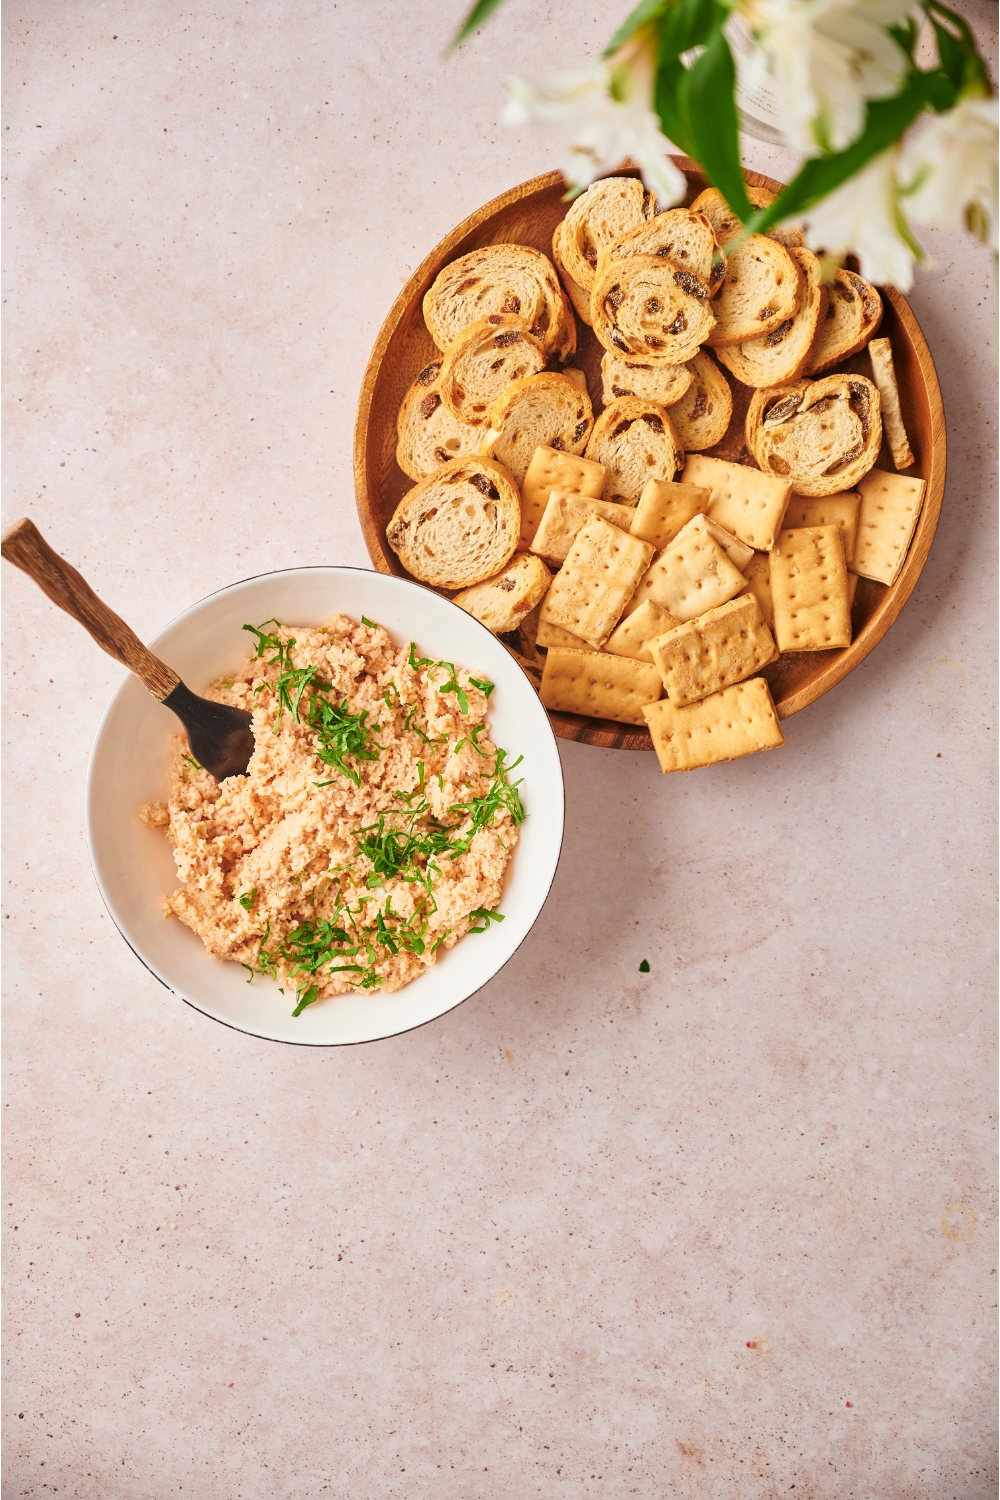 Deviled ham topped with fresh herbs in a white bowl with a spoon, next to a plate of crackers and bread slices.